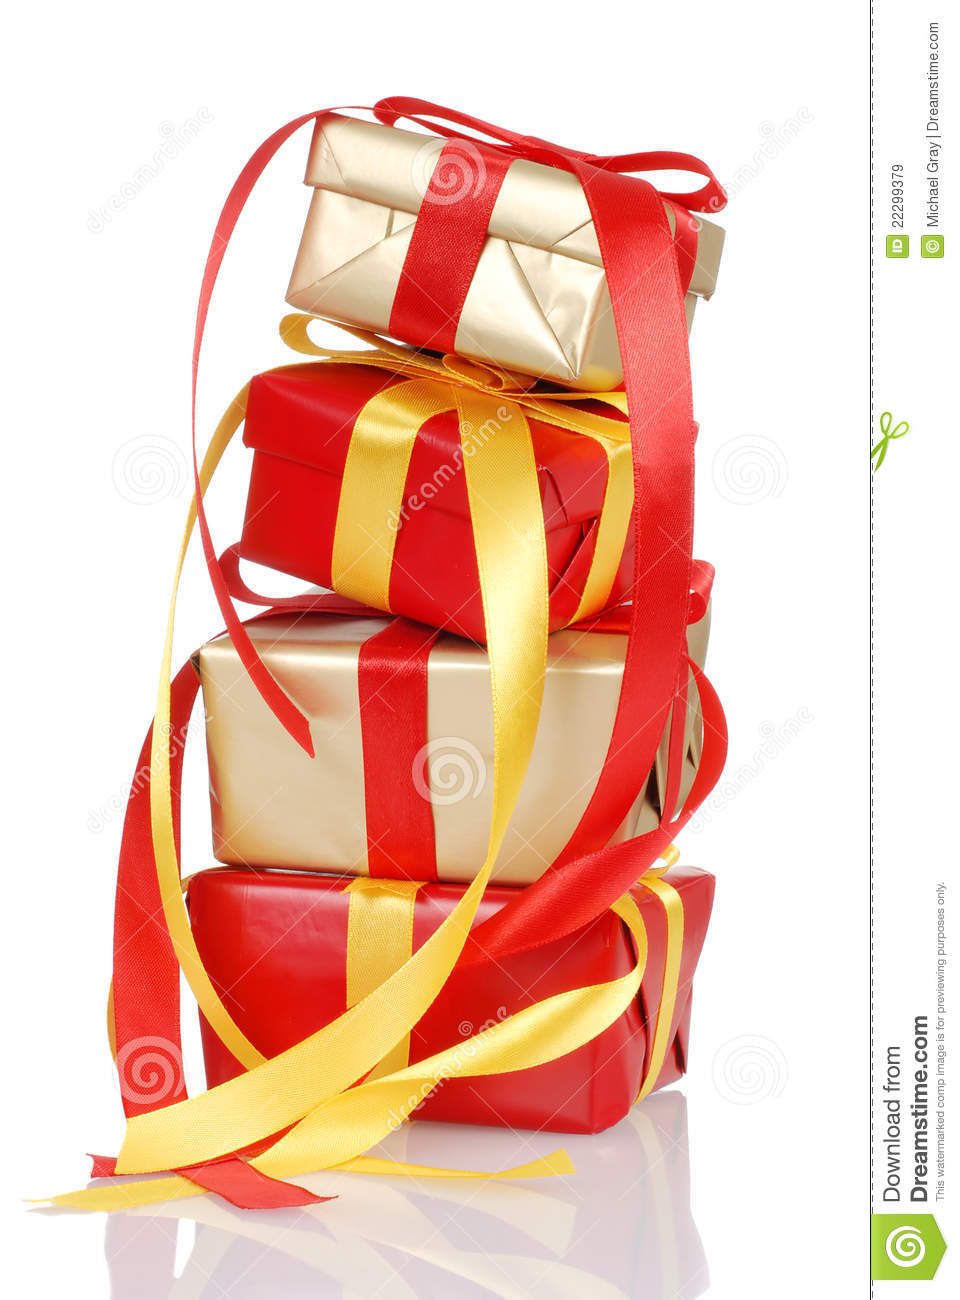 Stack Of Red And Gold Christmas Presents Royalty Free Stock Images